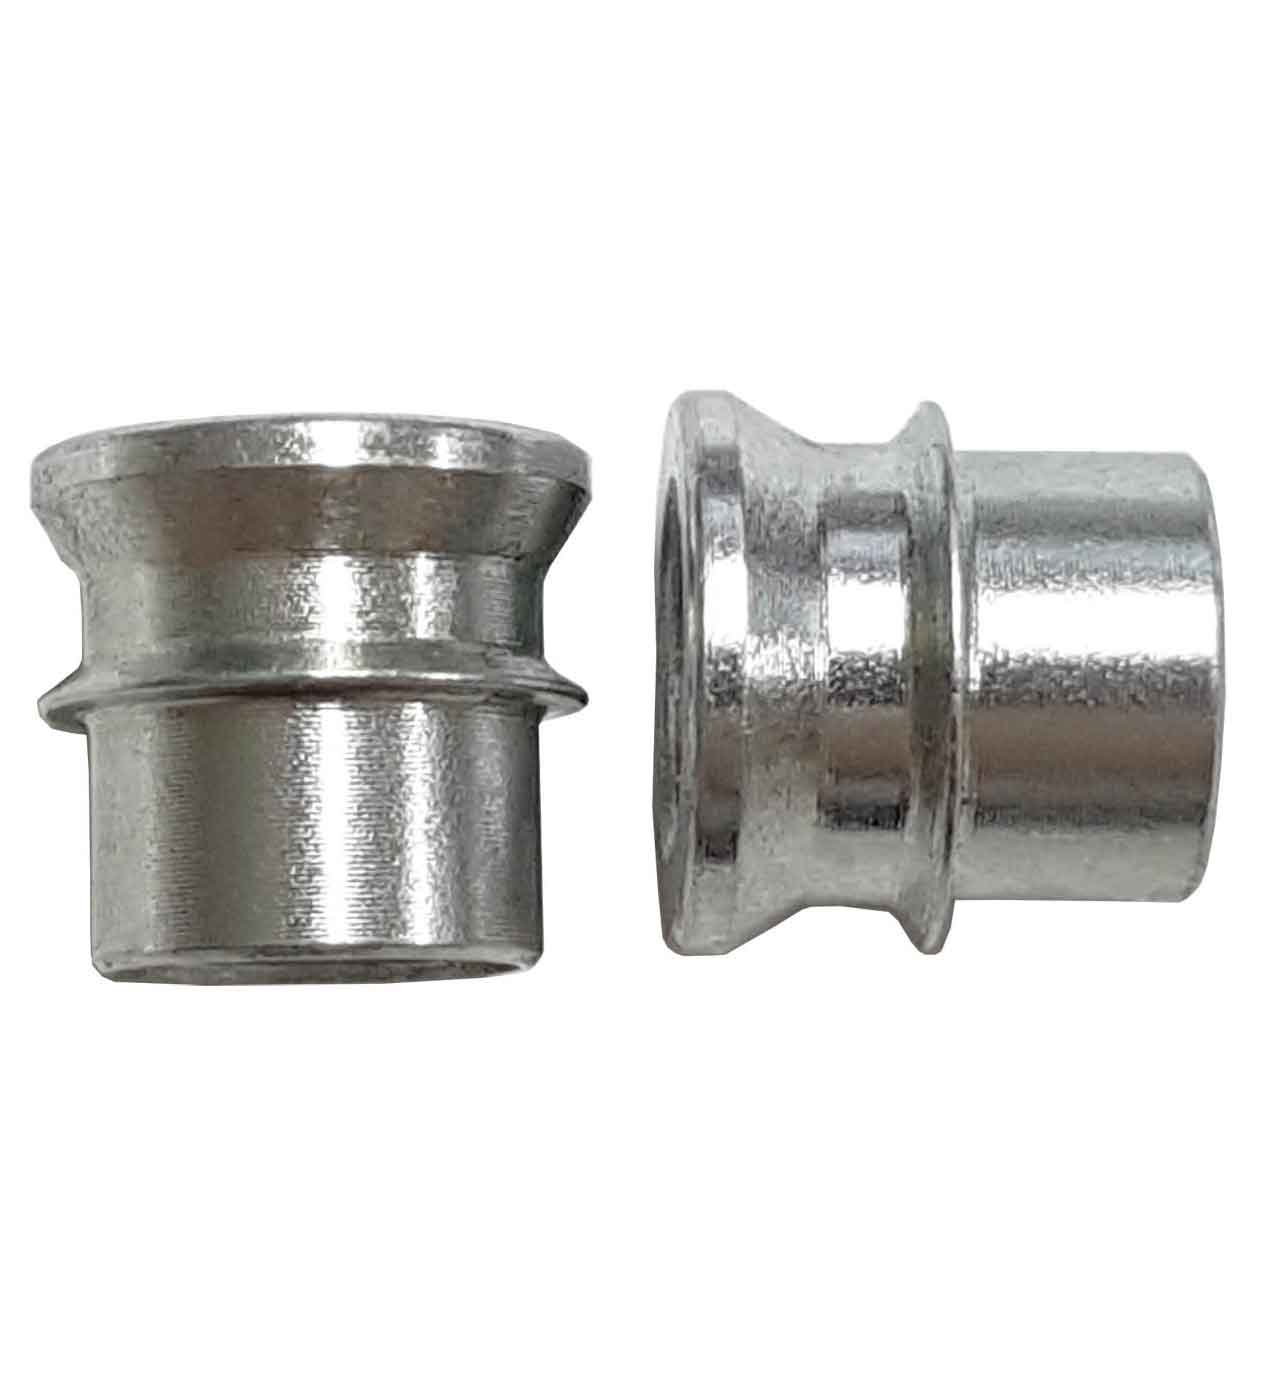 M12 to M8 Rod End Misalignment Reducers